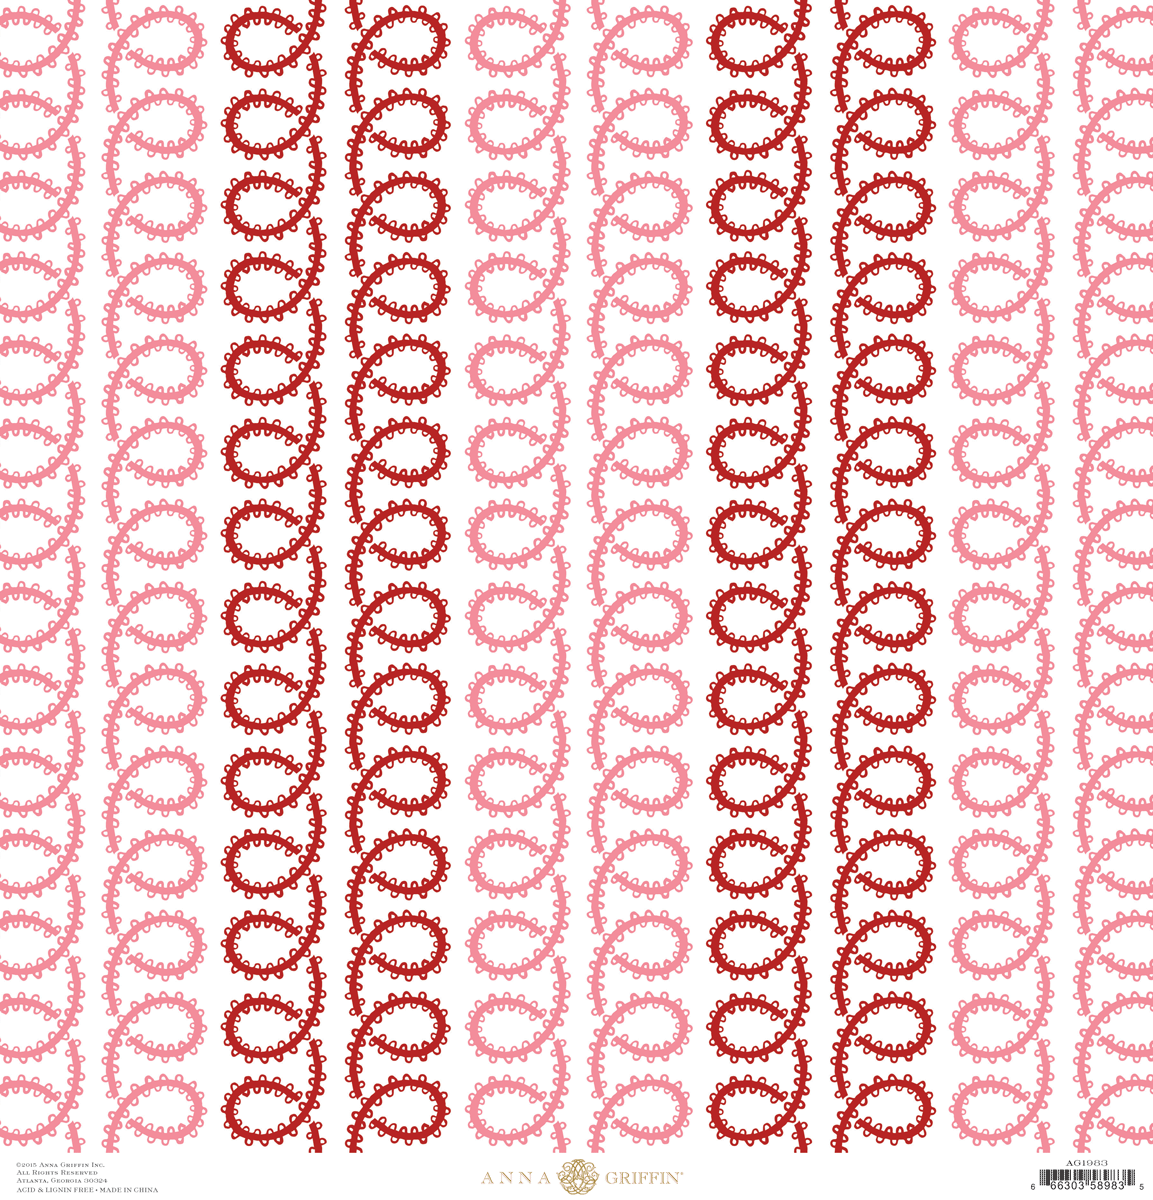 a red and white striped pattern with circles.